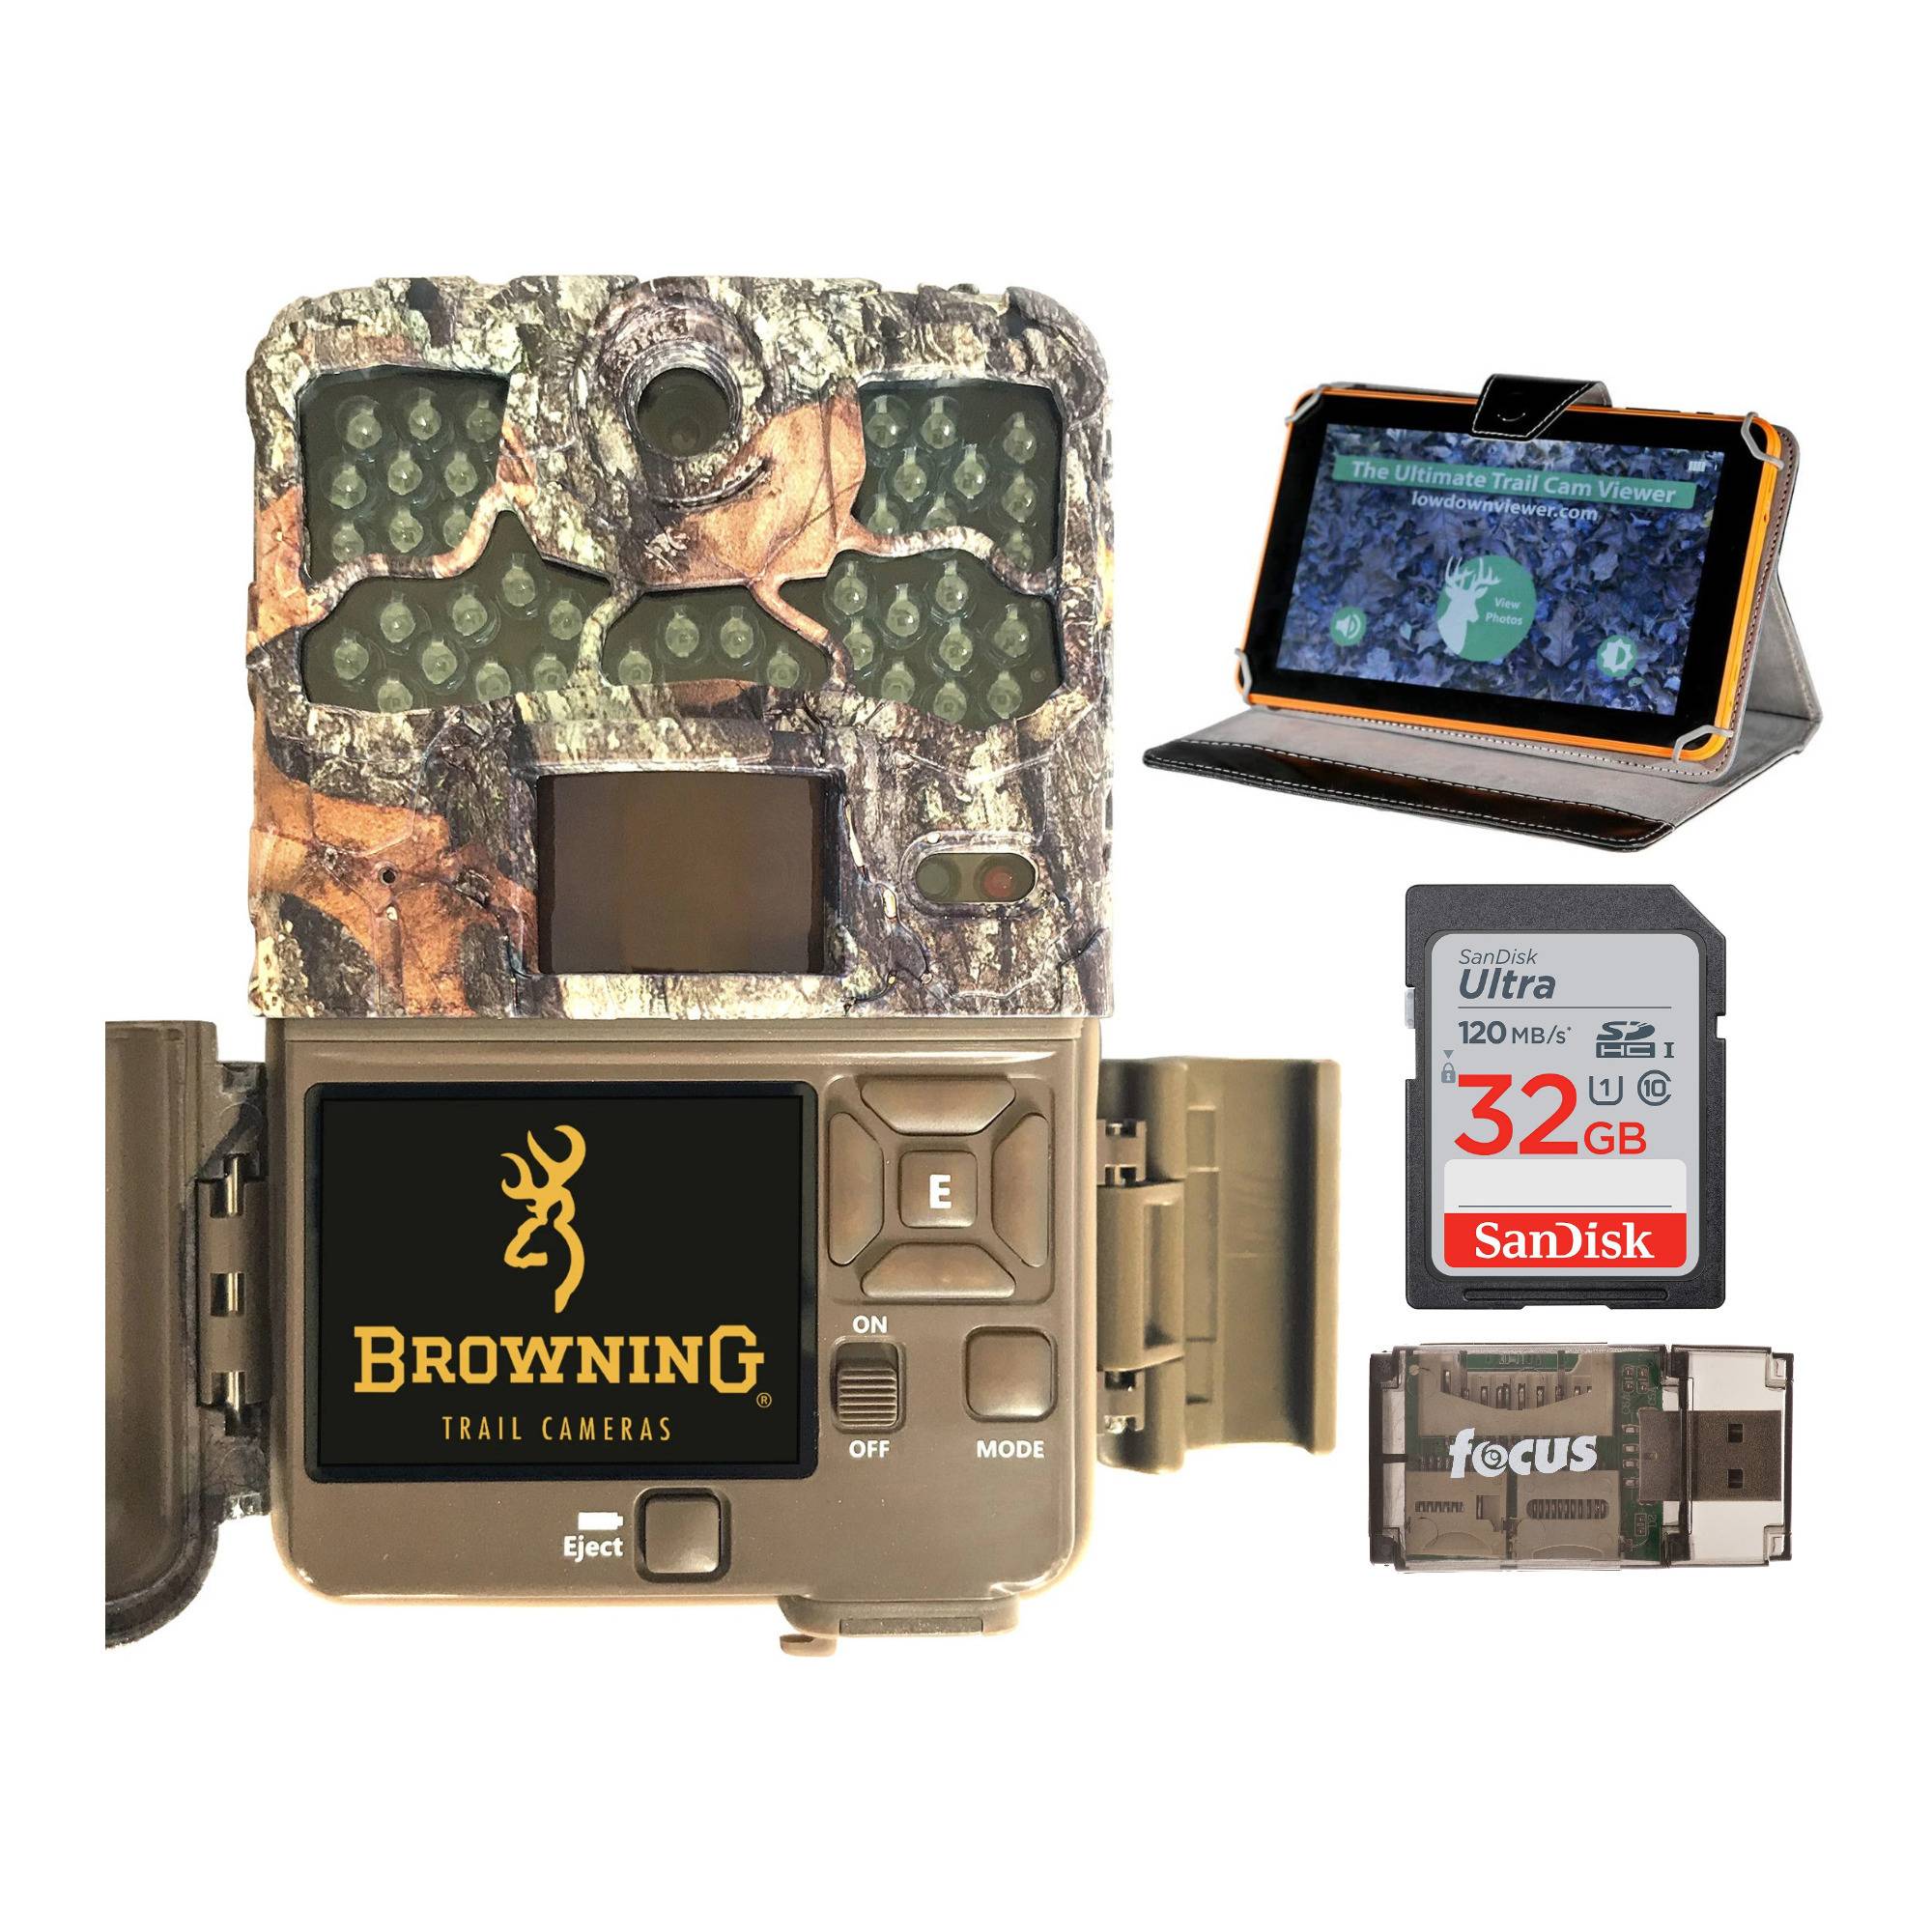 Browning Trail Cameras 20MP Recon Force Edge Trail Camera with Image and Video Viewer, 32GB SD Card